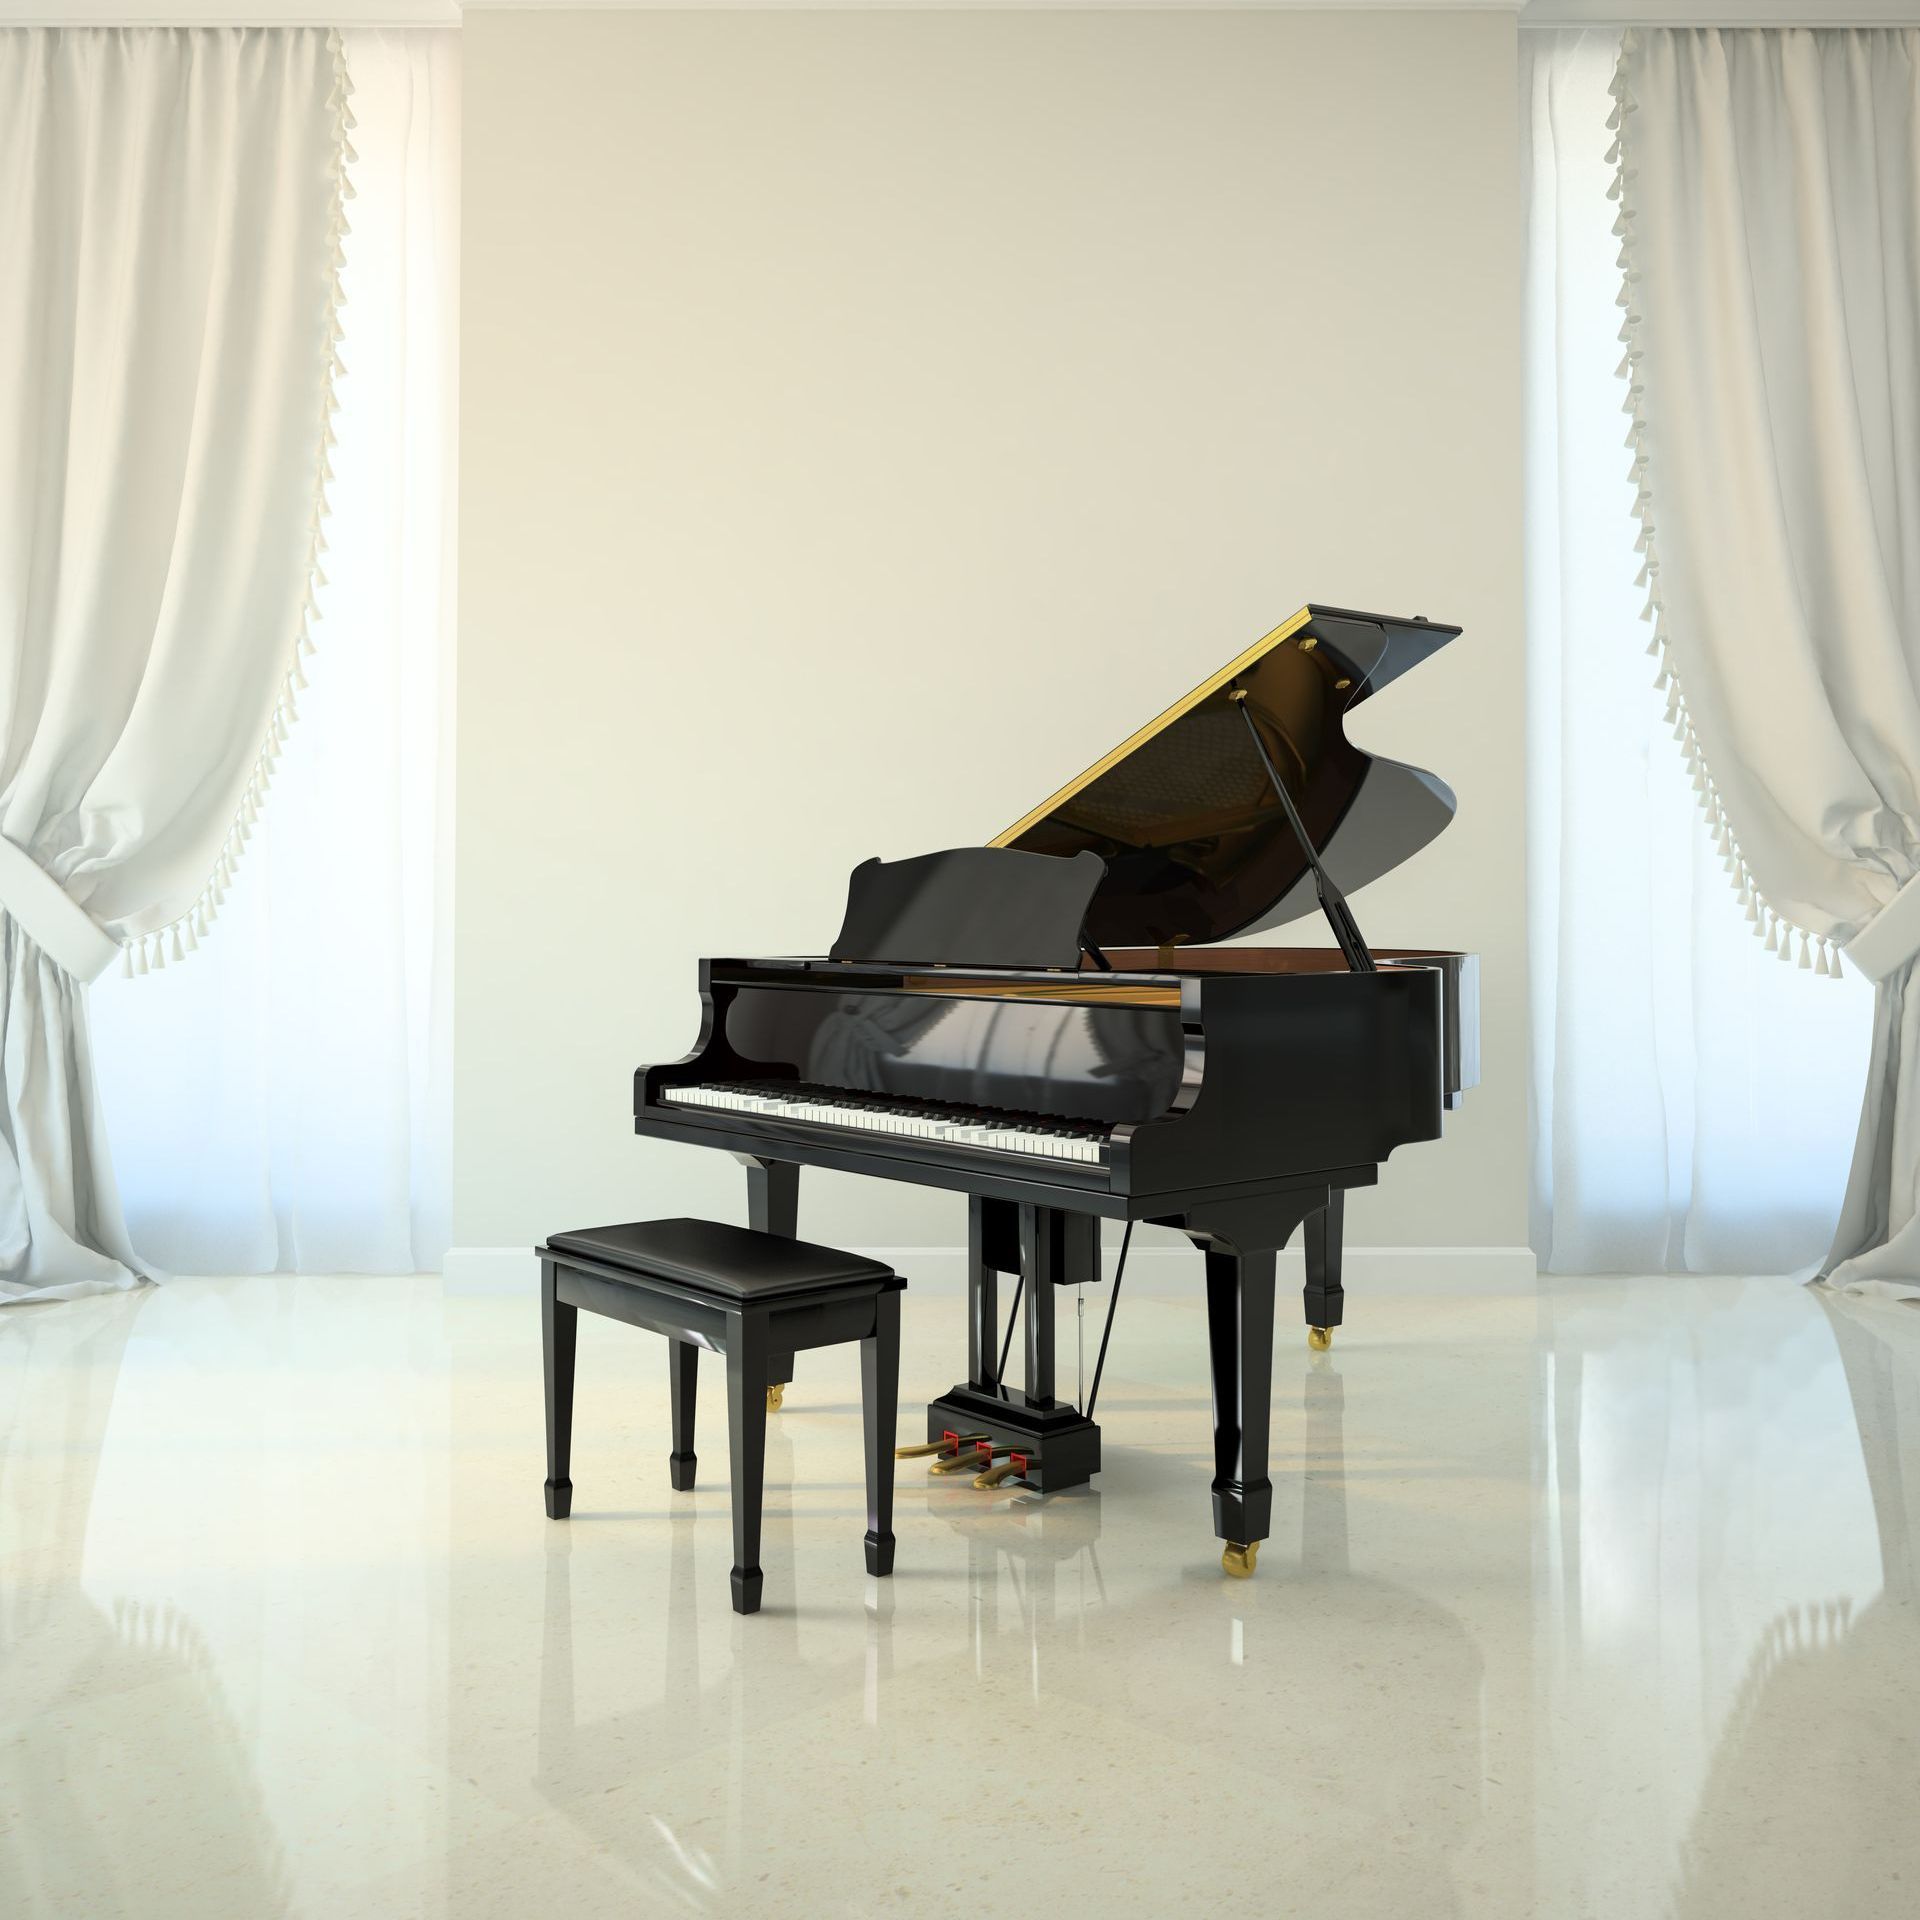 A black grand piano is sitting in a room with white curtains.